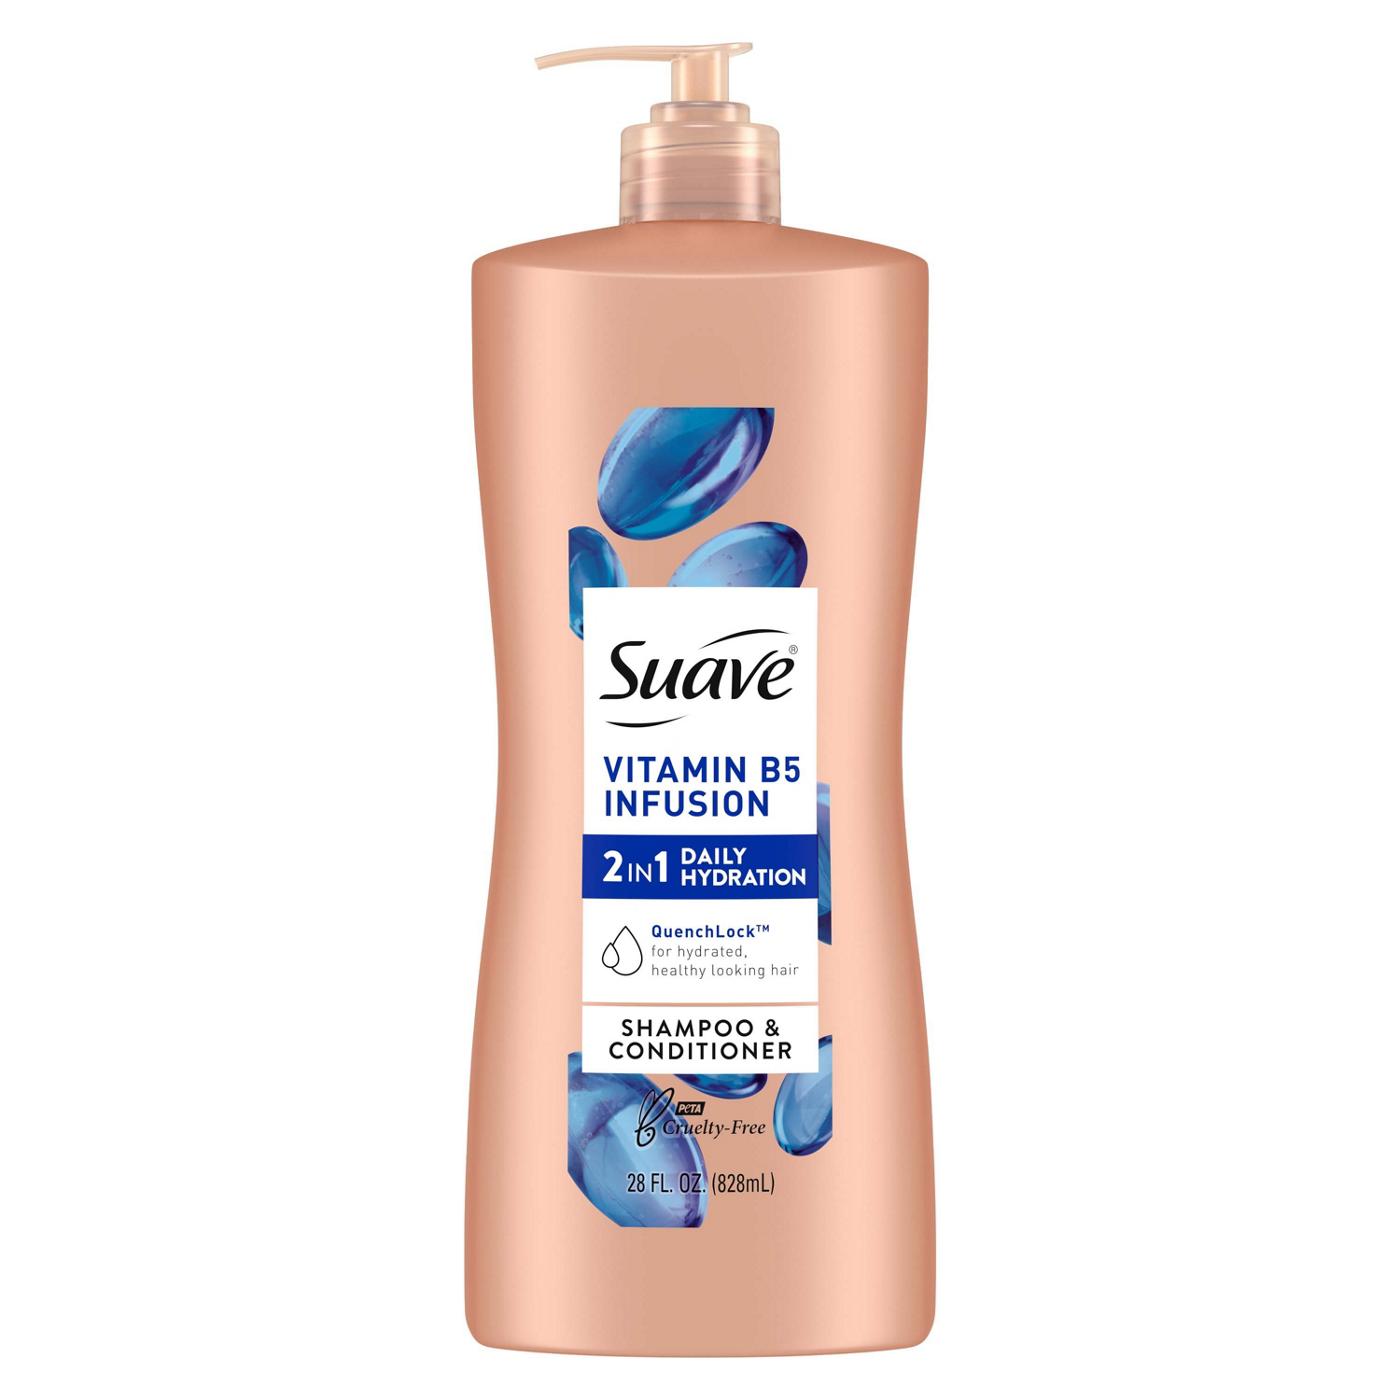 Suave Vitamin B5 Infusion 2 In 1 Daily Hydration Shampoo & Conditioner; image 1 of 4